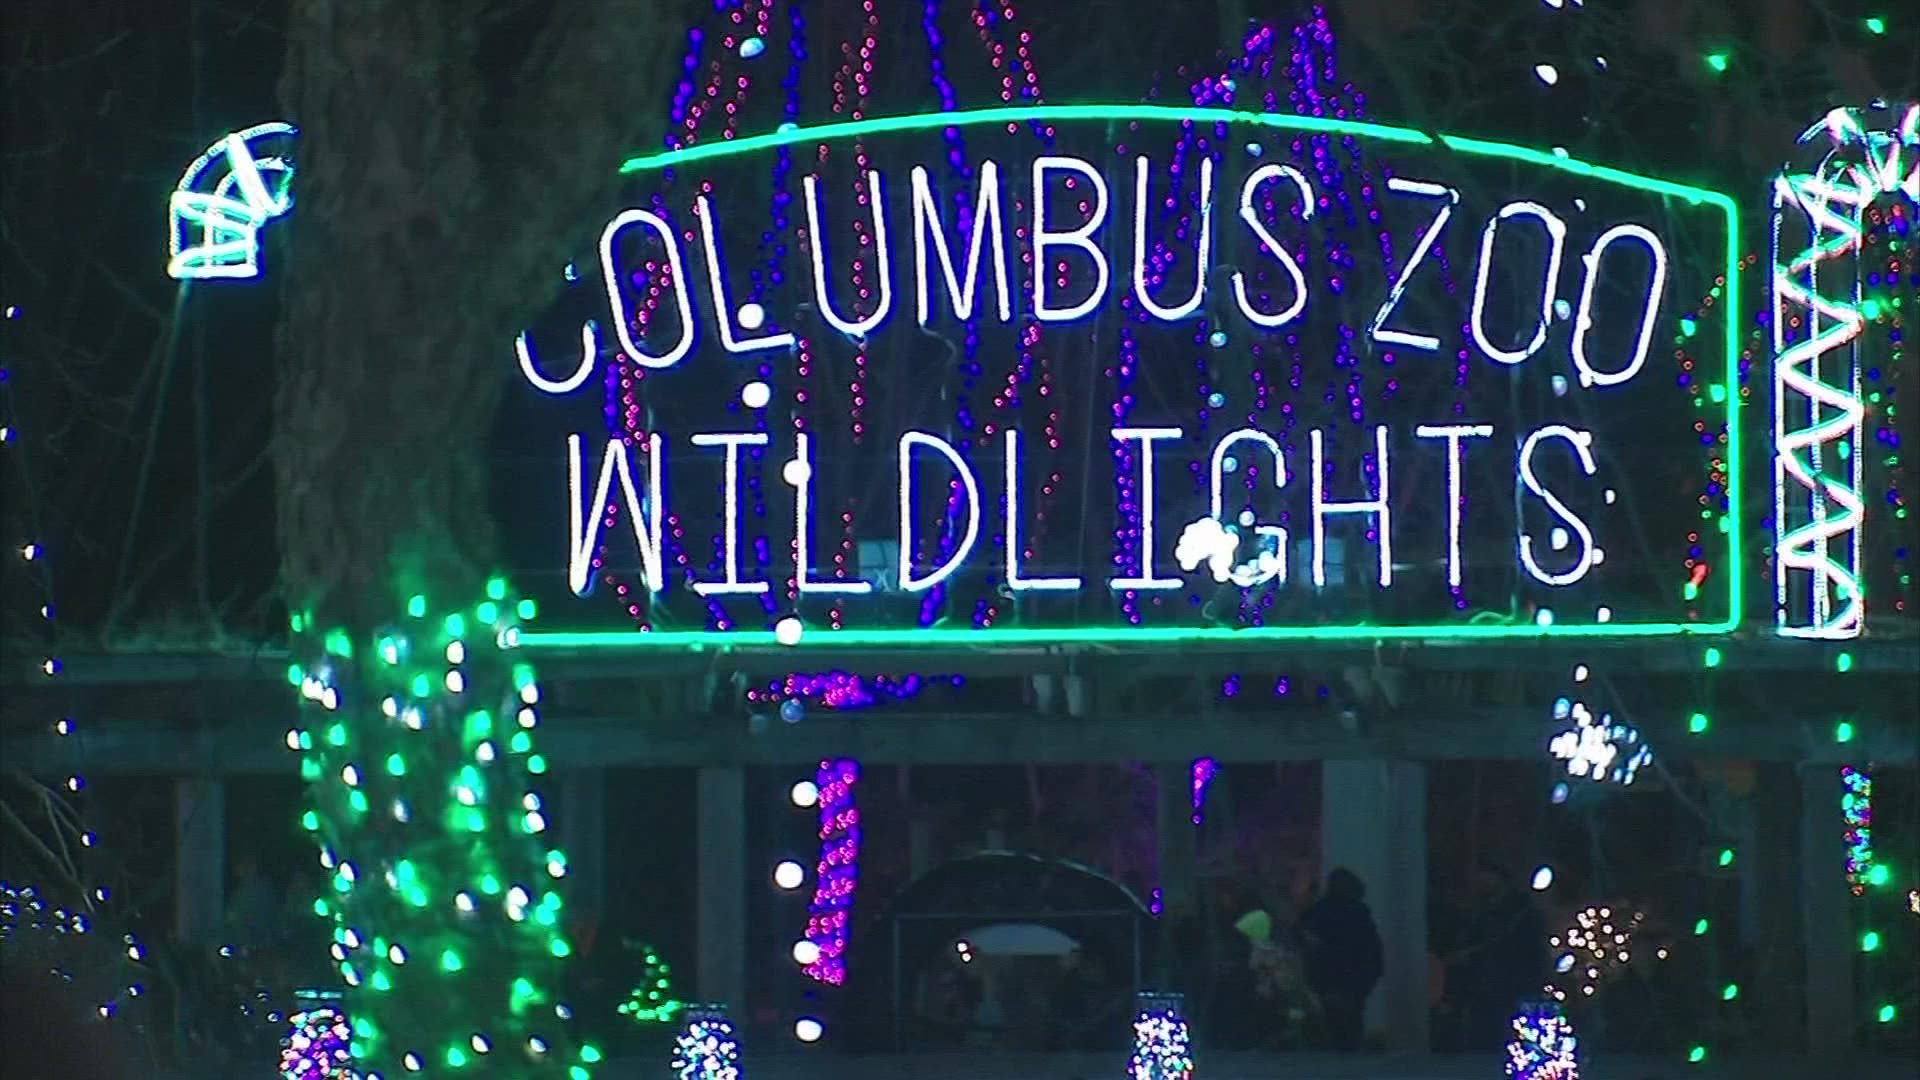 The popular holiday event will run through Jan. 2, and features more than just festive lights.